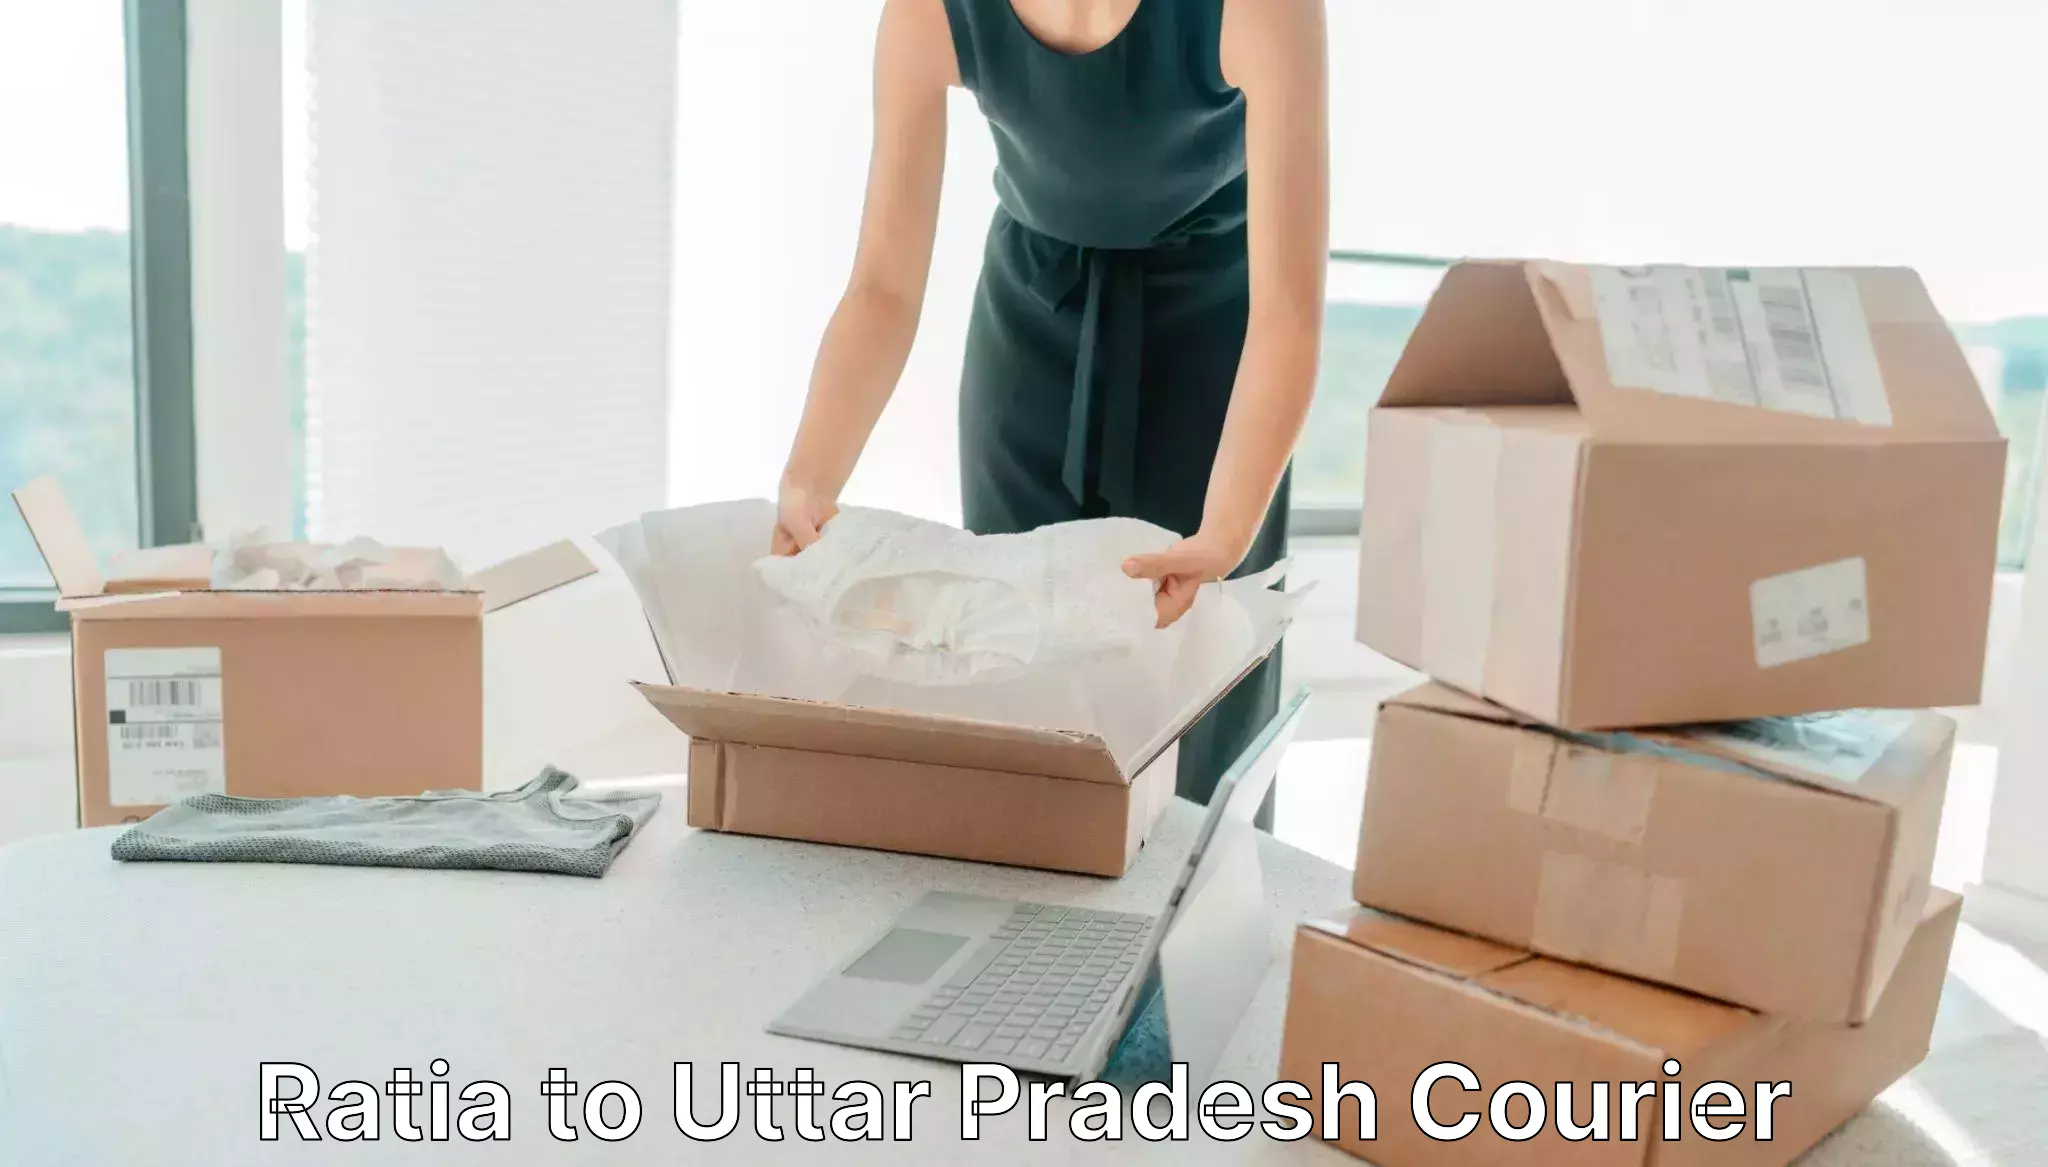 High-quality delivery services Ratia to Rampur